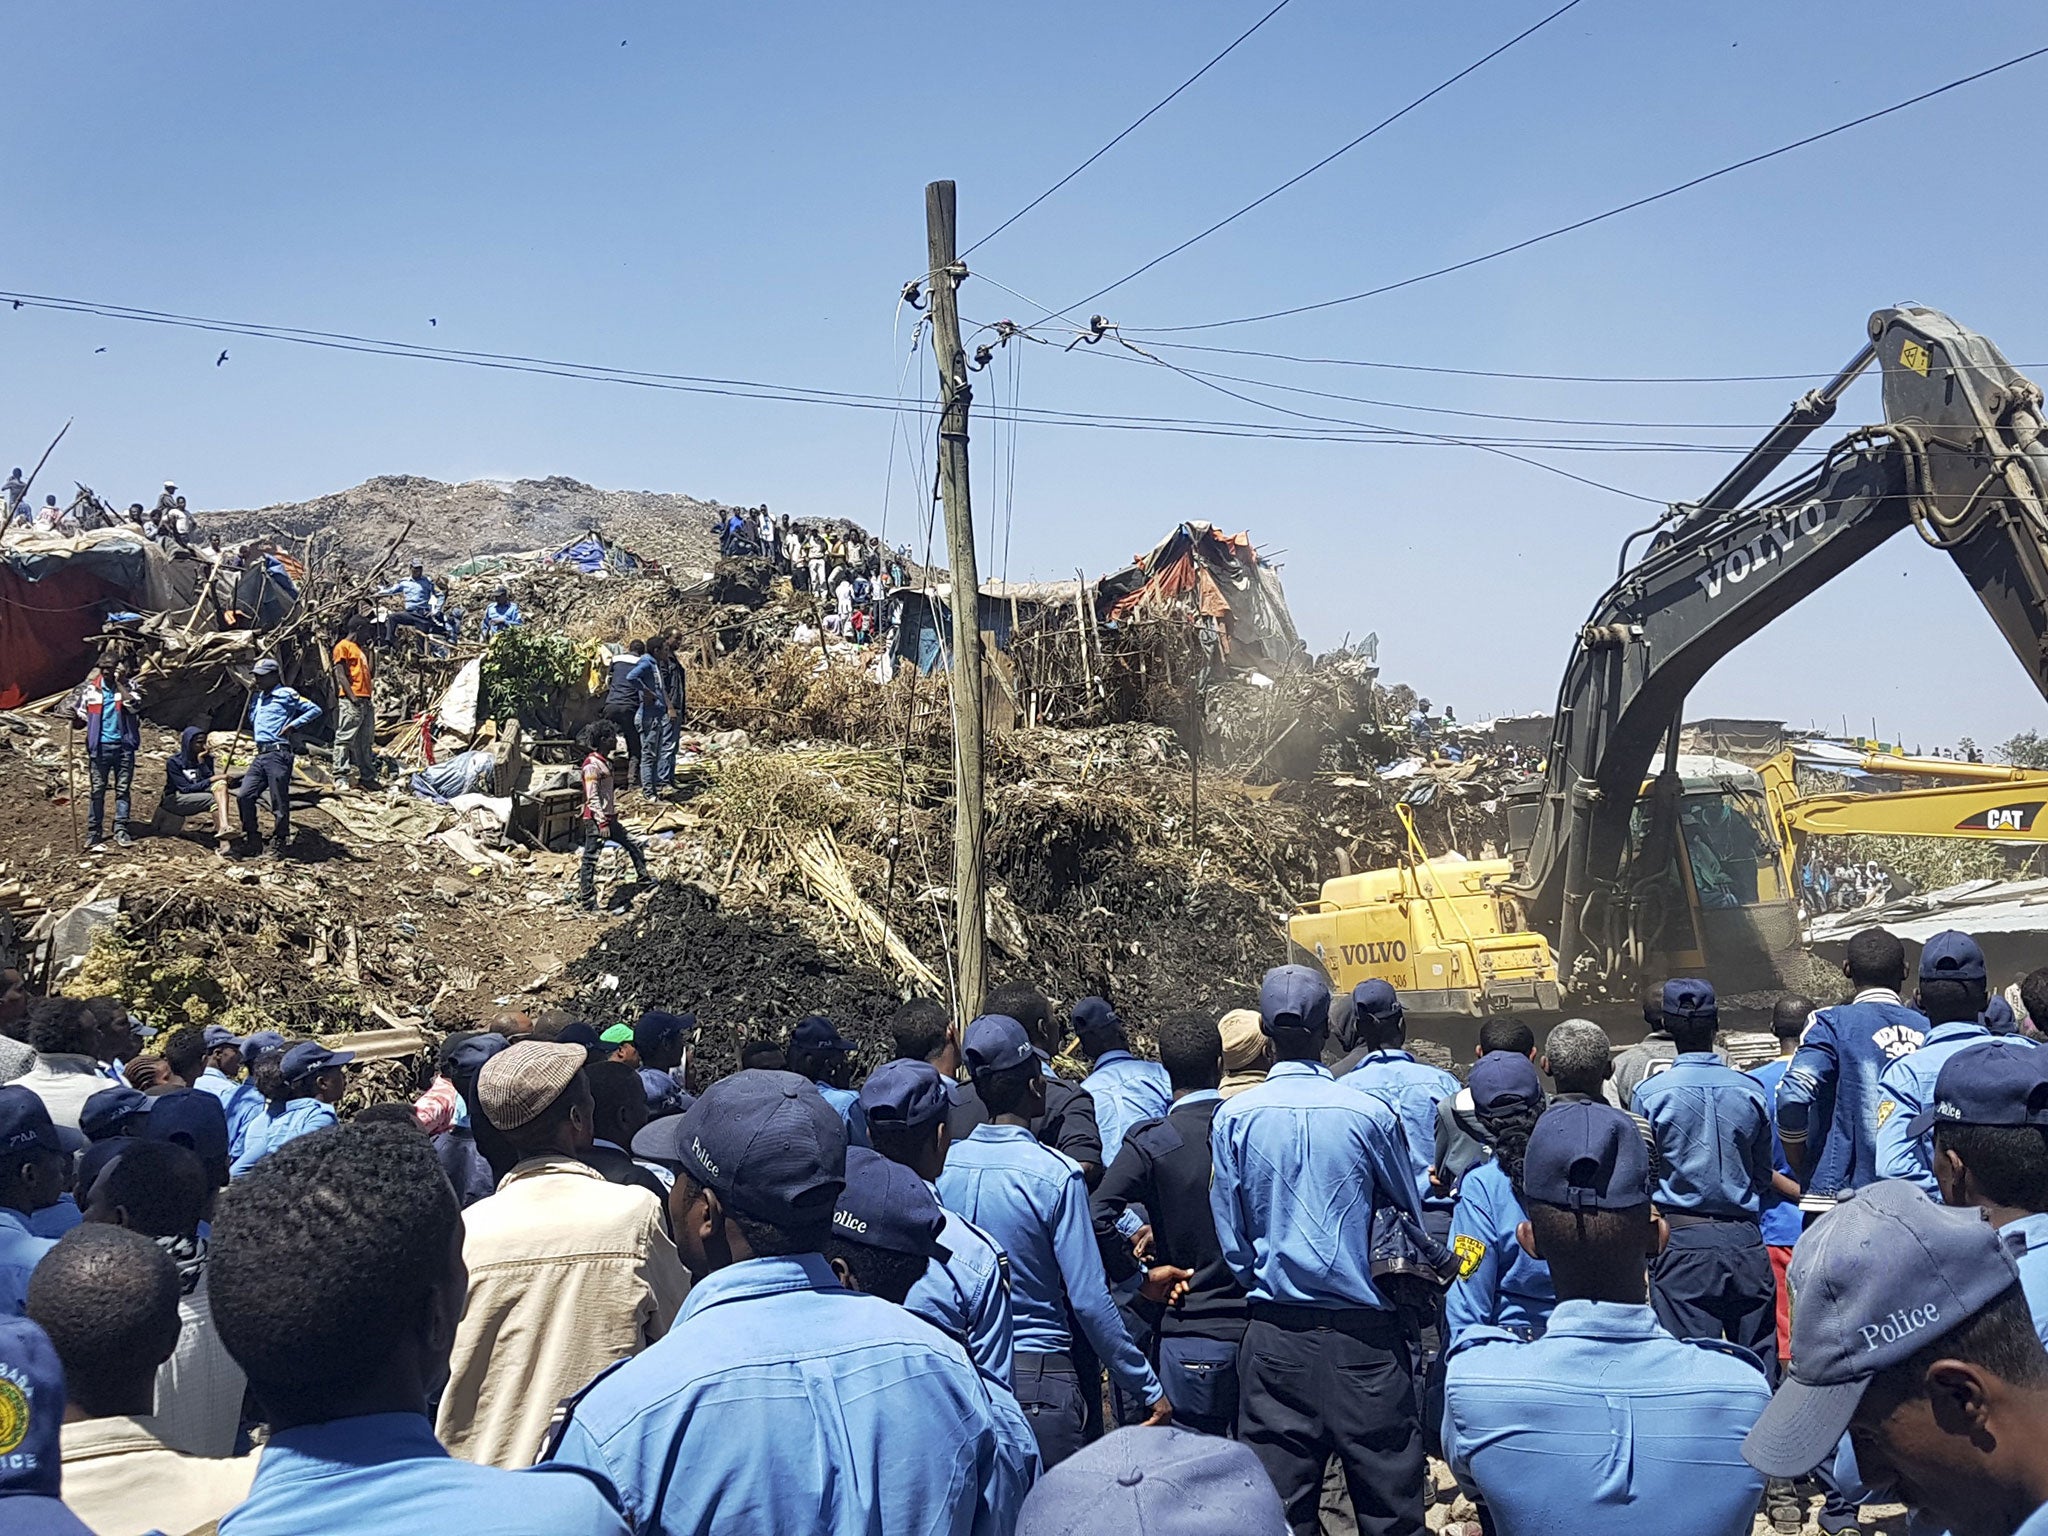 Police officers secure the perimeter at the scene of a garbage landslide, as excavators aid rescue efforts, on the outskirts of the capital Addis Ababa, Ethiopia Sunday, March 12, 2017